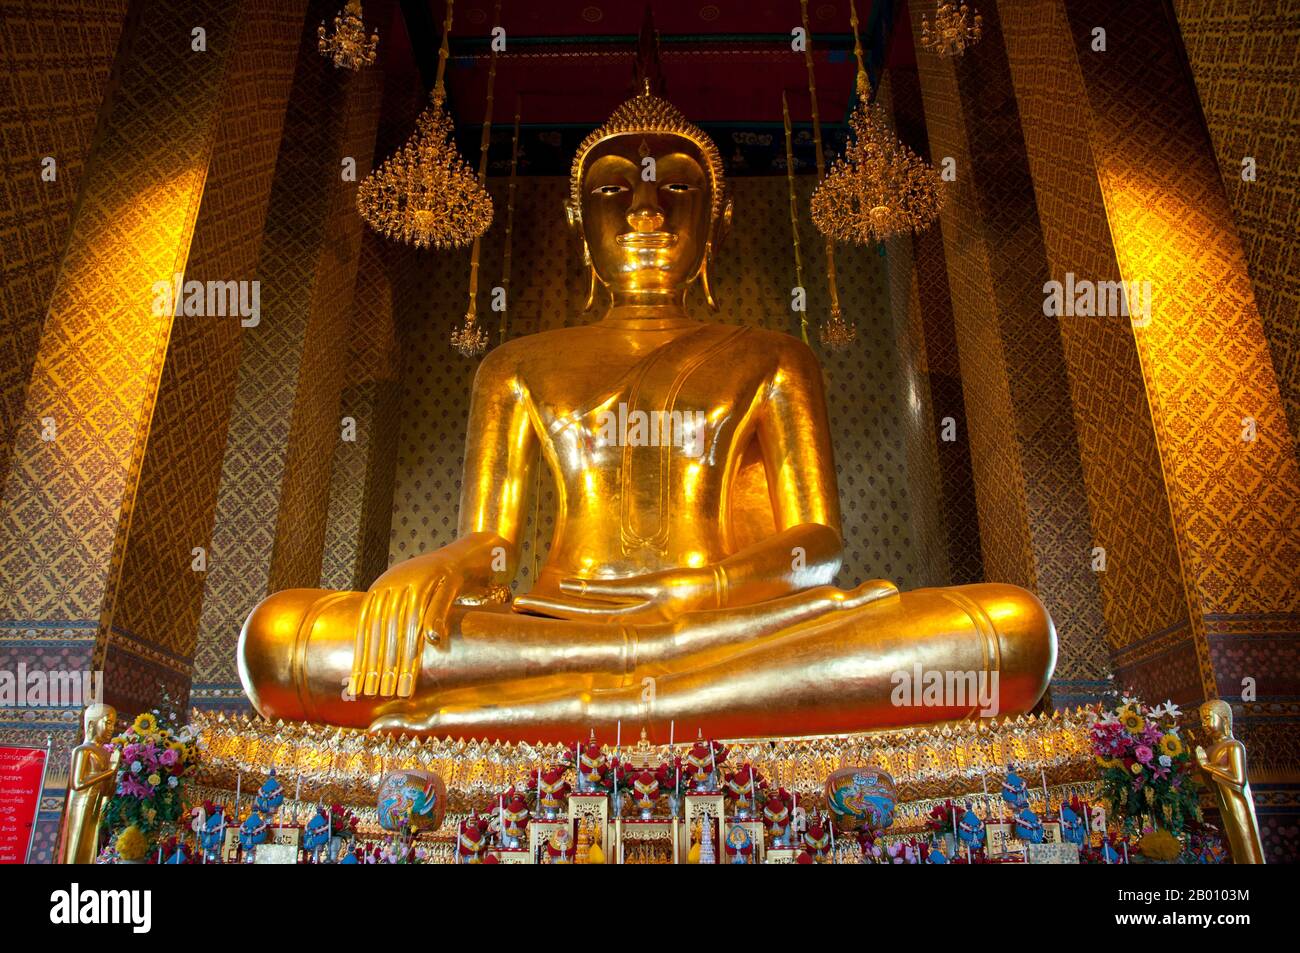 Thailand: Giant seated in the main viharn, Wat Kalayanimit, Thonburi, Bangkok. Wat Kalayanimit, next to the Chao Phraya River, in Thonburi was built in 1825 by Chaophraya Nikonbodin, who then donated